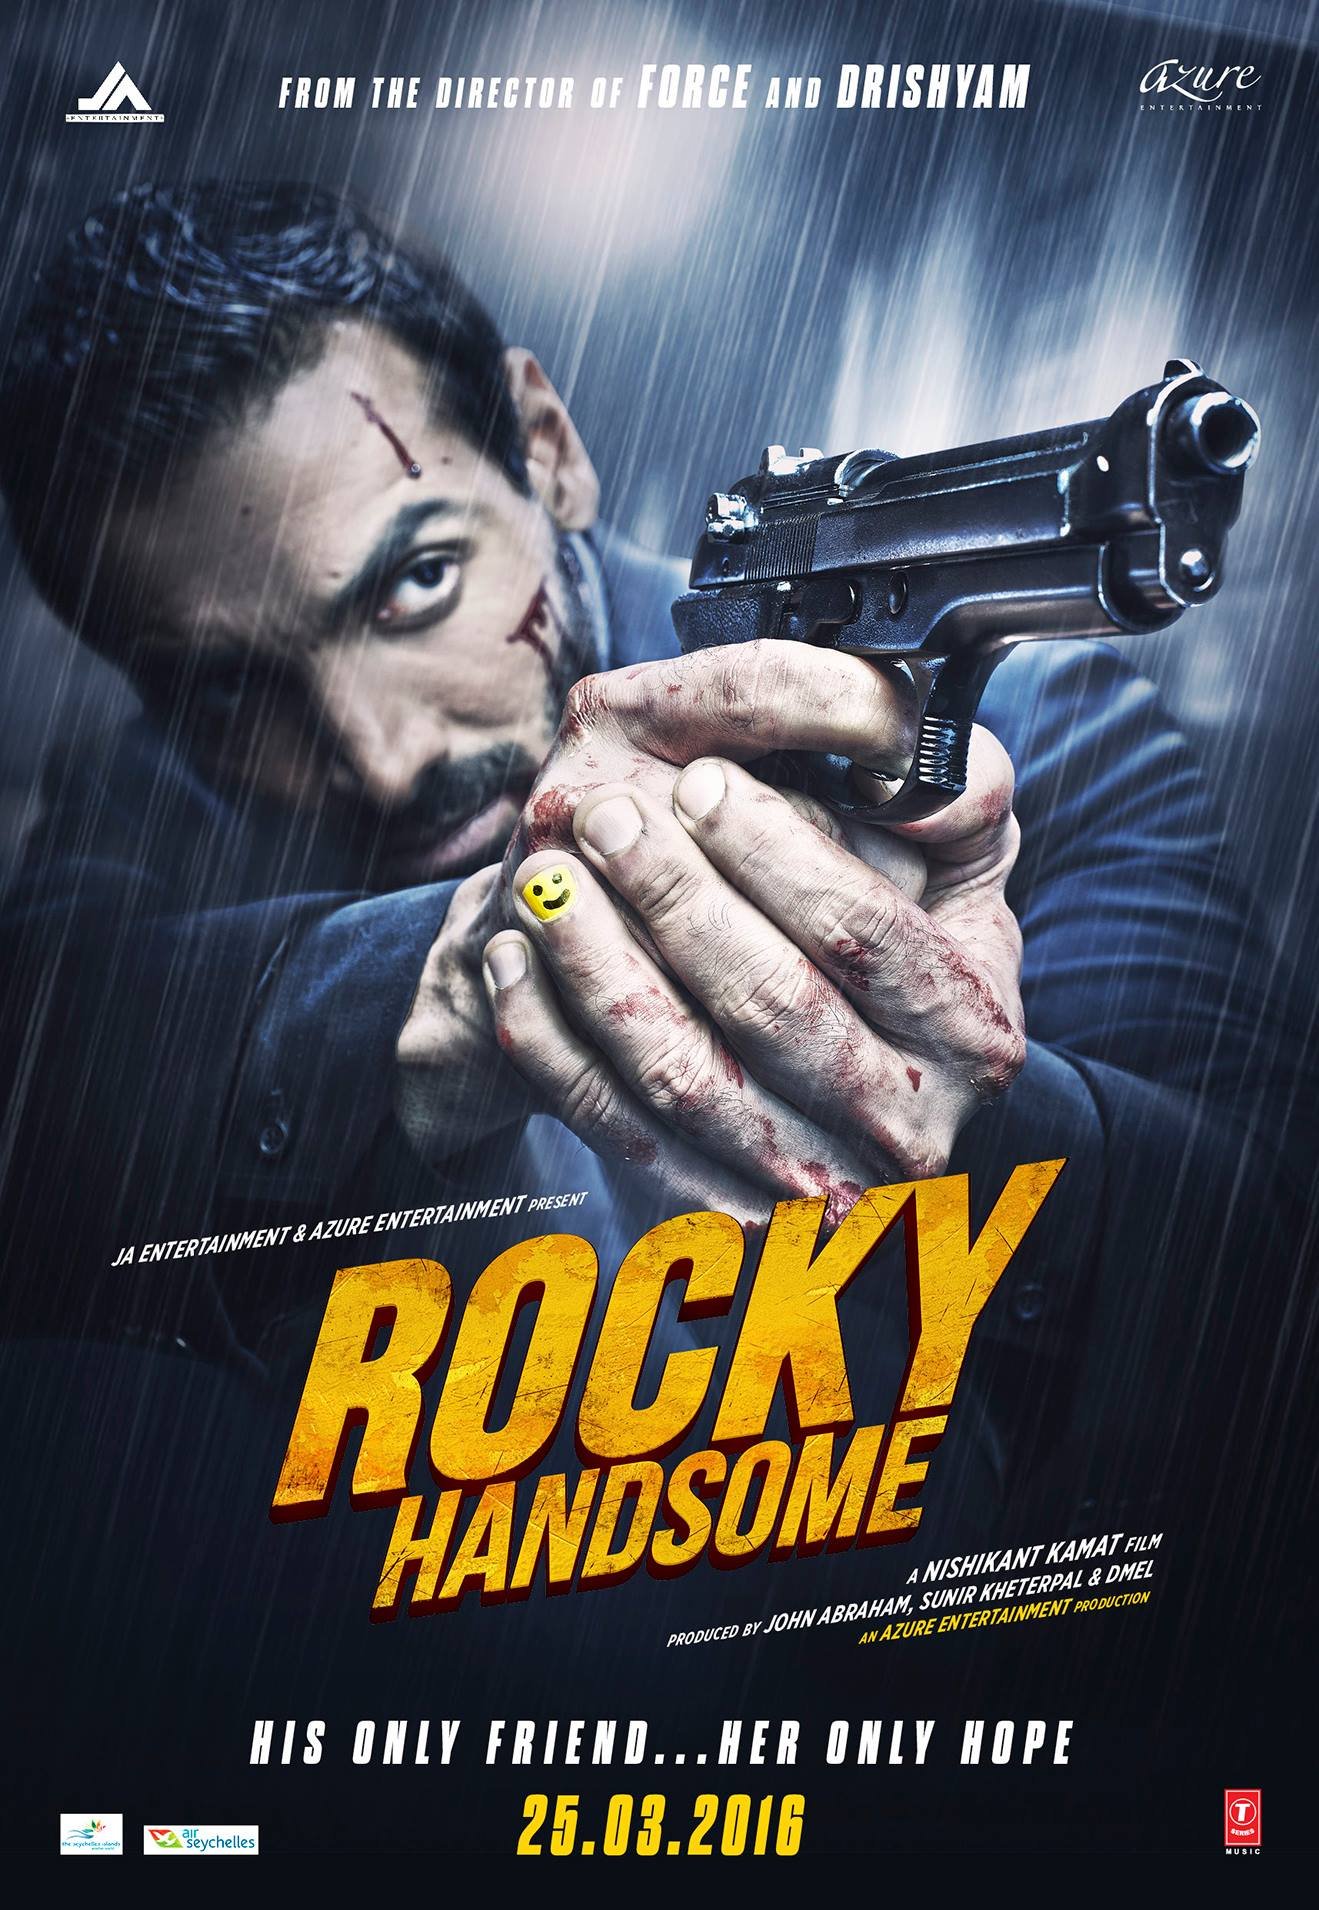 Hindi poster of the movie Rocky Handsome